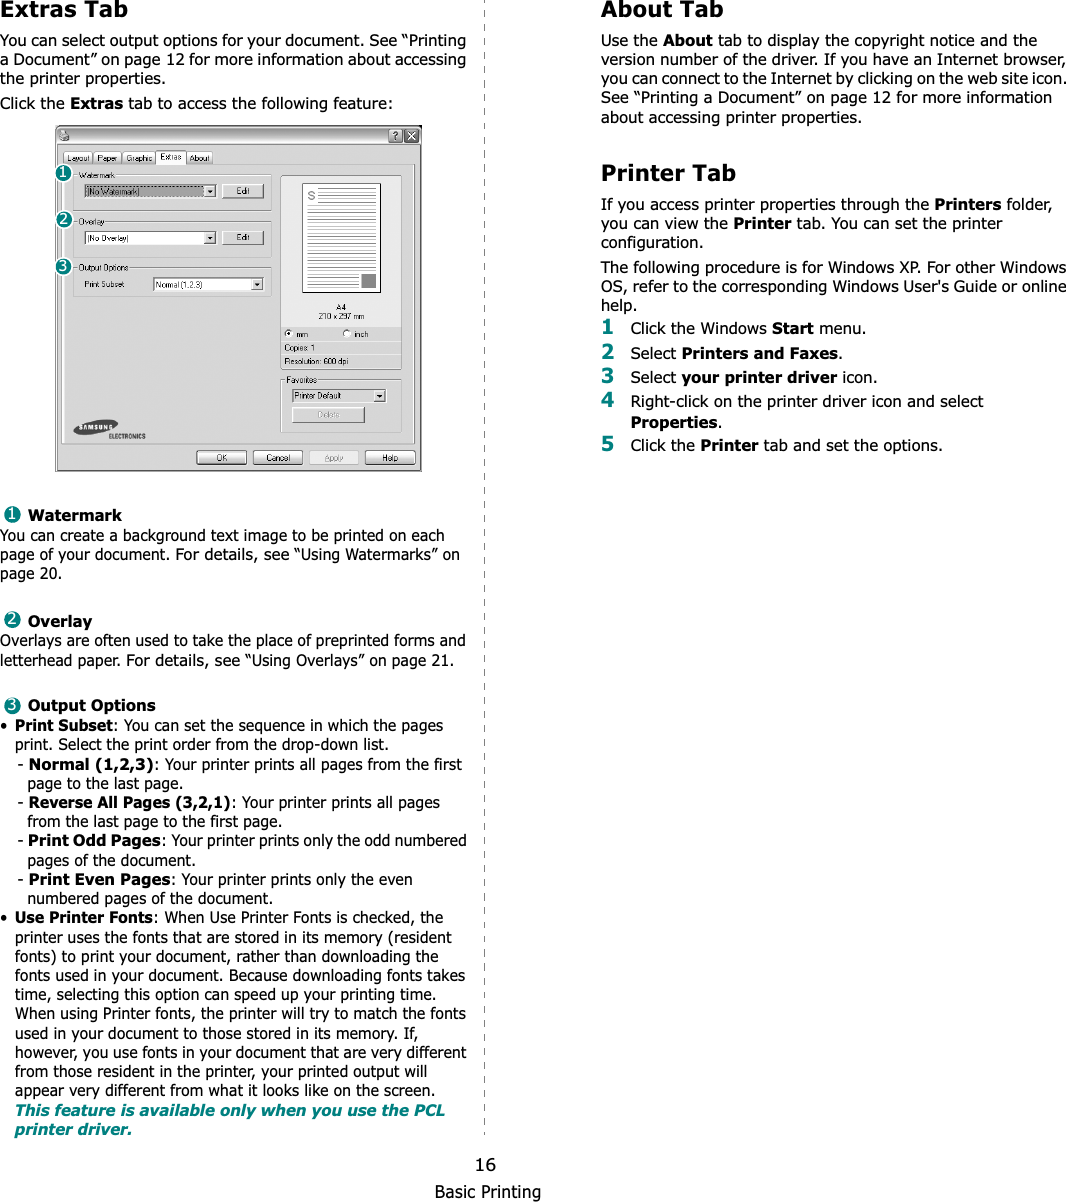 Basic Printing16Extras TabYou can select output options for your document. See “Printing a Document” on page 12 for more information about accessing the printer properties.Click the Extras tab to access the following feature:  WatermarkYou can create a background text image to be printed on each page of your document. For details, see “Using Watermarks” on page 20.OverlayOverlays are often used to take the place of preprinted forms and letterhead paper. For details, see “Using Overlays” on page 21.Output Options•Print Subset: You can set the sequence in which the pages print. Select the print order from the drop-down list.-Normal (1,2,3): Your printer prints all pages from the first page to the last page.-Reverse All Pages (3,2,1): Your printer prints all pages from the last page to the first page.-Print Odd Pages: Your printer prints only the odd numbered pages of the document.-Print Even Pages: Your printer prints only the even numbered pages of the document.•Use Printer Fonts: When Use Printer Fonts is checked, the printer uses the fonts that are stored in its memory (resident fonts) to print your document, rather than downloading the fonts used in your document. Because downloading fonts takes time, selecting this option can speed up your printing time. When using Printer fonts, the printer will try to match the fonts used in your document to those stored in its memory. If, however, you use fonts in your document that are very different from those resident in the printer, your printed output will appear very different from what it looks like on the screen.  This feature is available only when you use the PCL printer driver.123123About TabUse the About tab to display the copyright notice and the version number of the driver. If you have an Internet browser, you can connect to the Internet by clicking on the web site icon. See “Printing a Document” on page 12 for more information about accessing printer properties.Printer TabIf you access printer properties through the Printers folder, you can view the Printer tab. You can set the printer configuration.The following procedure is for Windows XP. For other Windows OS, refer to the corresponding Windows User&apos;s Guide or online help.1Click the Windows Start menu. 2Select Printers and Faxes.3Select your printer driver icon. 4Right-click on the printer driver icon and select Properties.5Click the Printer tab and set the options.  